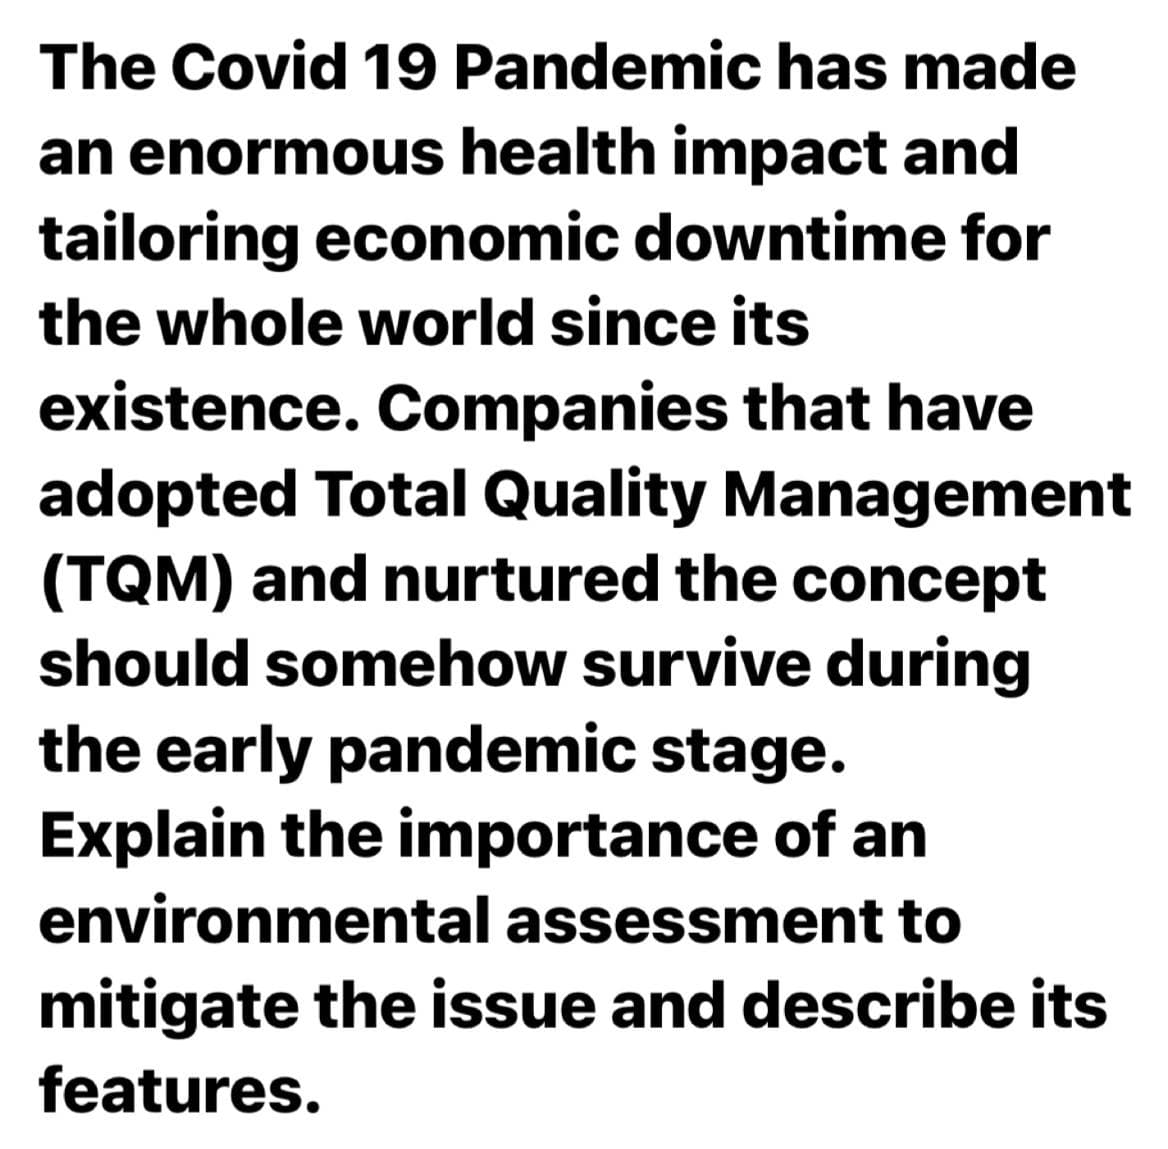 The Covid 19 Pandemic has made
an enormous health impact and
tailoring economic downtime for
the whole world since its
existence. Companies that have
adopted Total Quality Management
(TQM) and nurtured the concept
should somehow survive during
the early pandemic stage.
Explain the importance of an
environmental assessment to
mitigate the issue and describe its
features.
